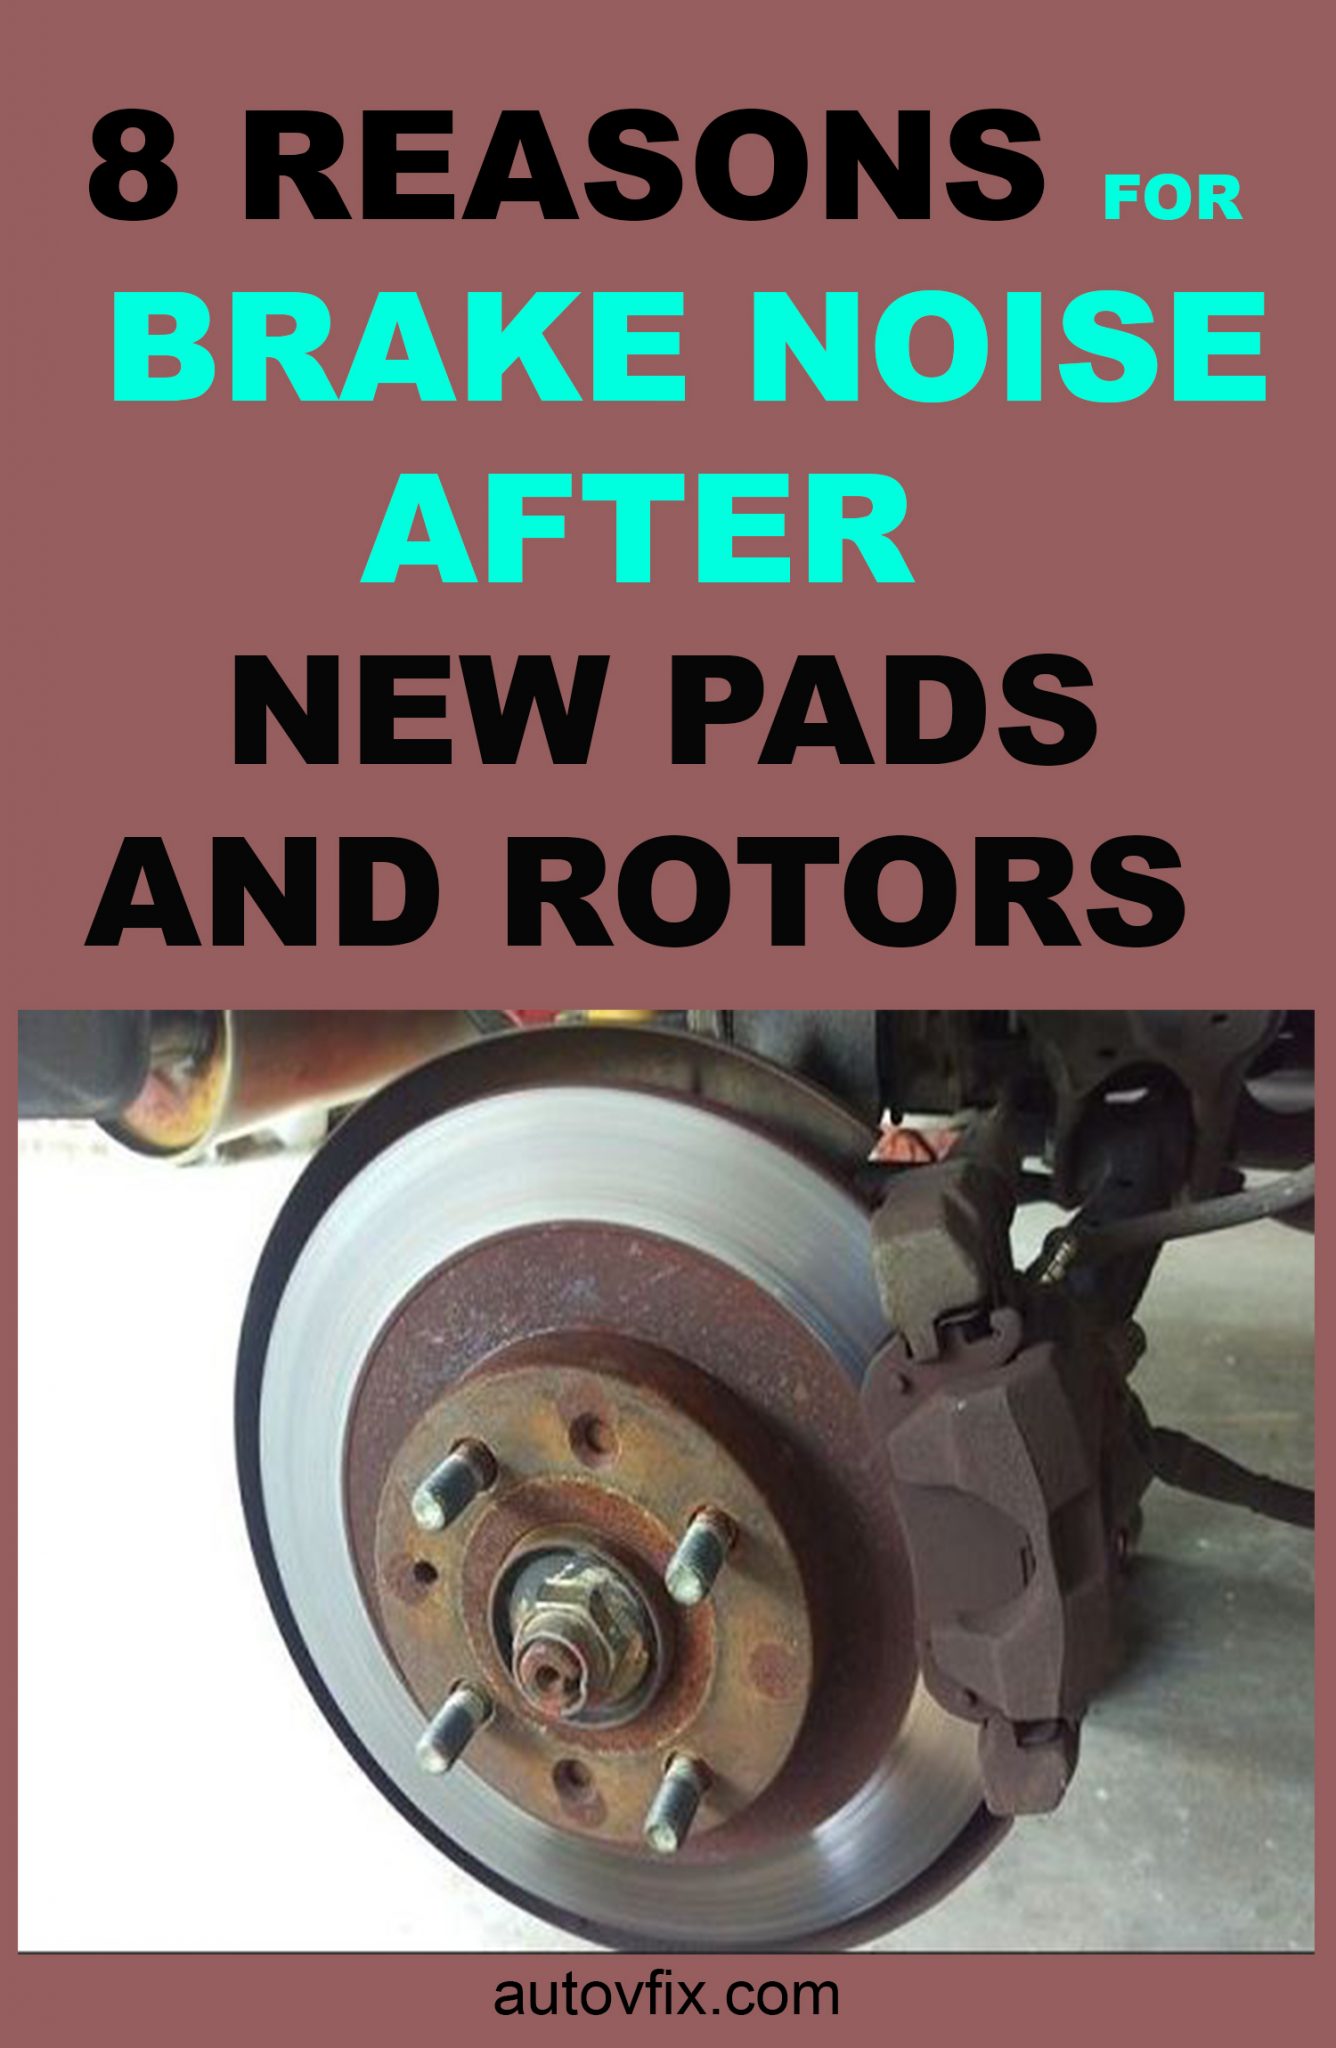 Causes of Brake Noise After New Pads and Rotors (new brakes squeaking ... - Reasons For Brake Noise After New PaDs AnD Rotors 1336x2048